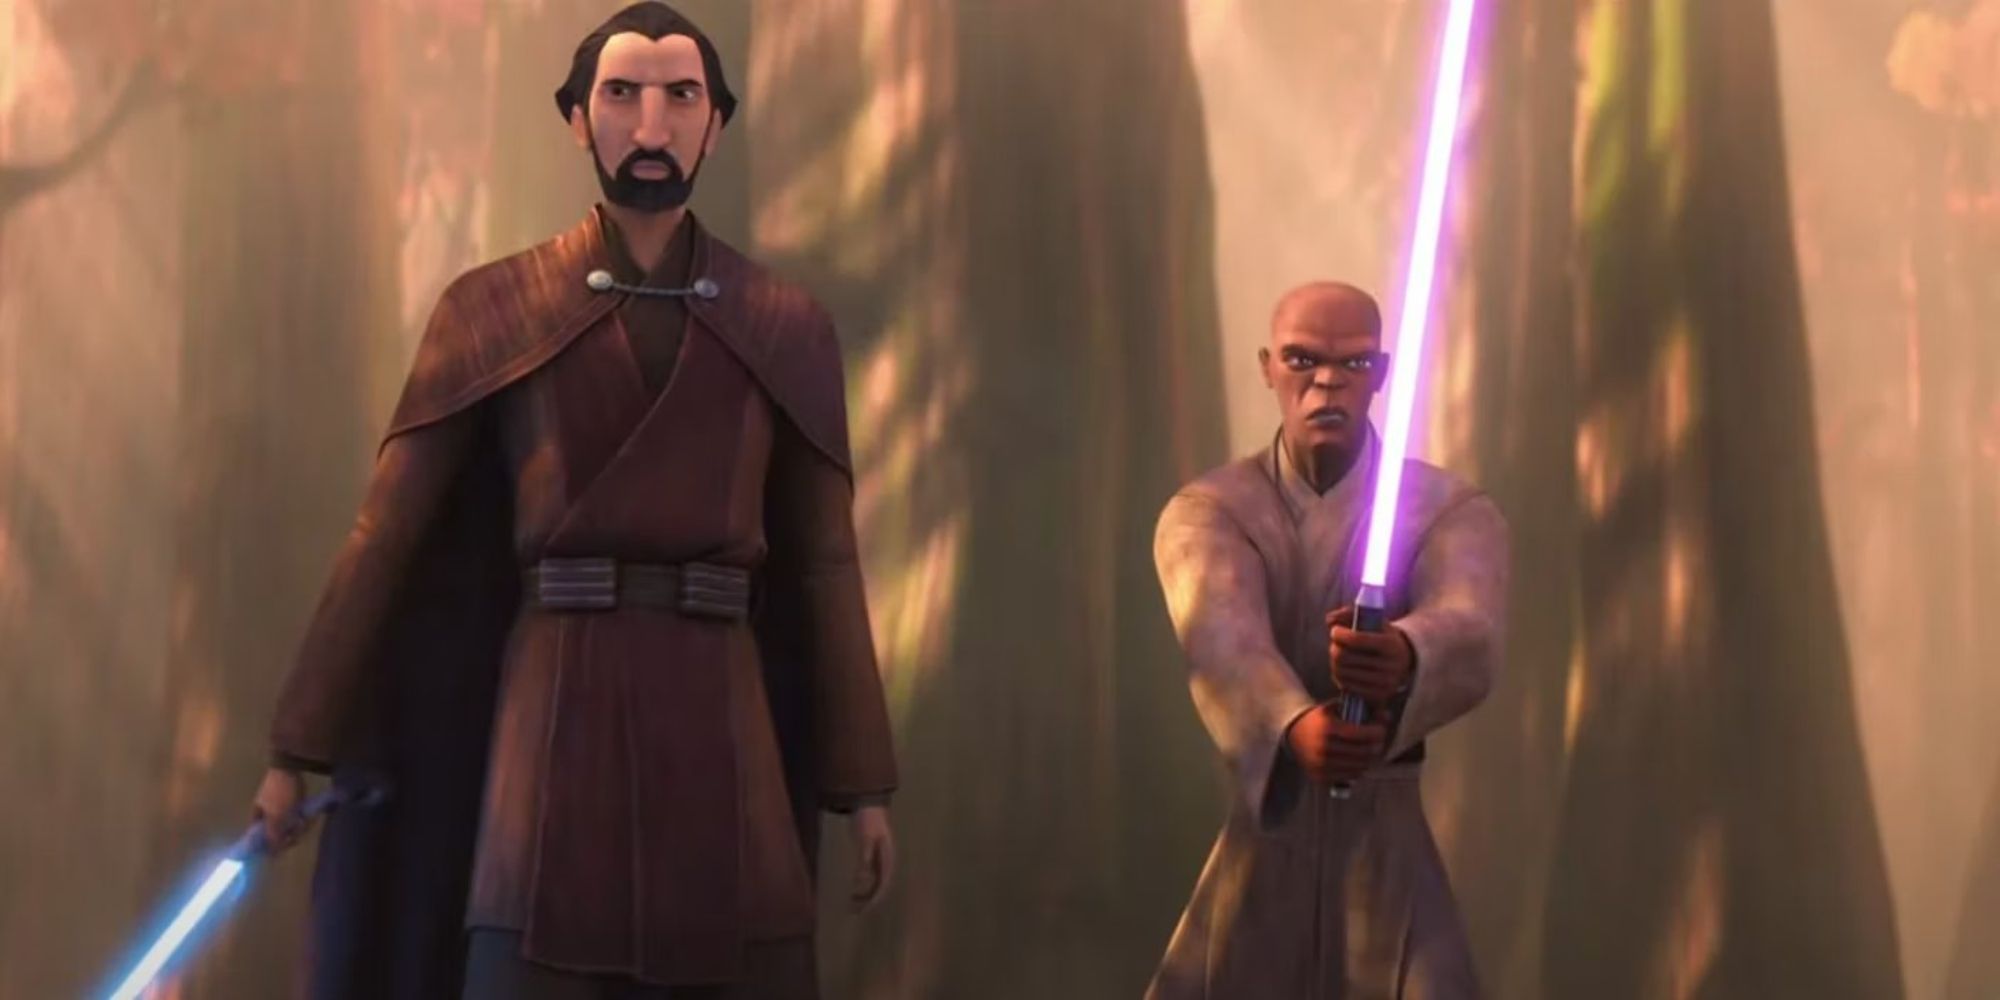 Count Dooku and Mace Windu appear in Tales of the Jedi.